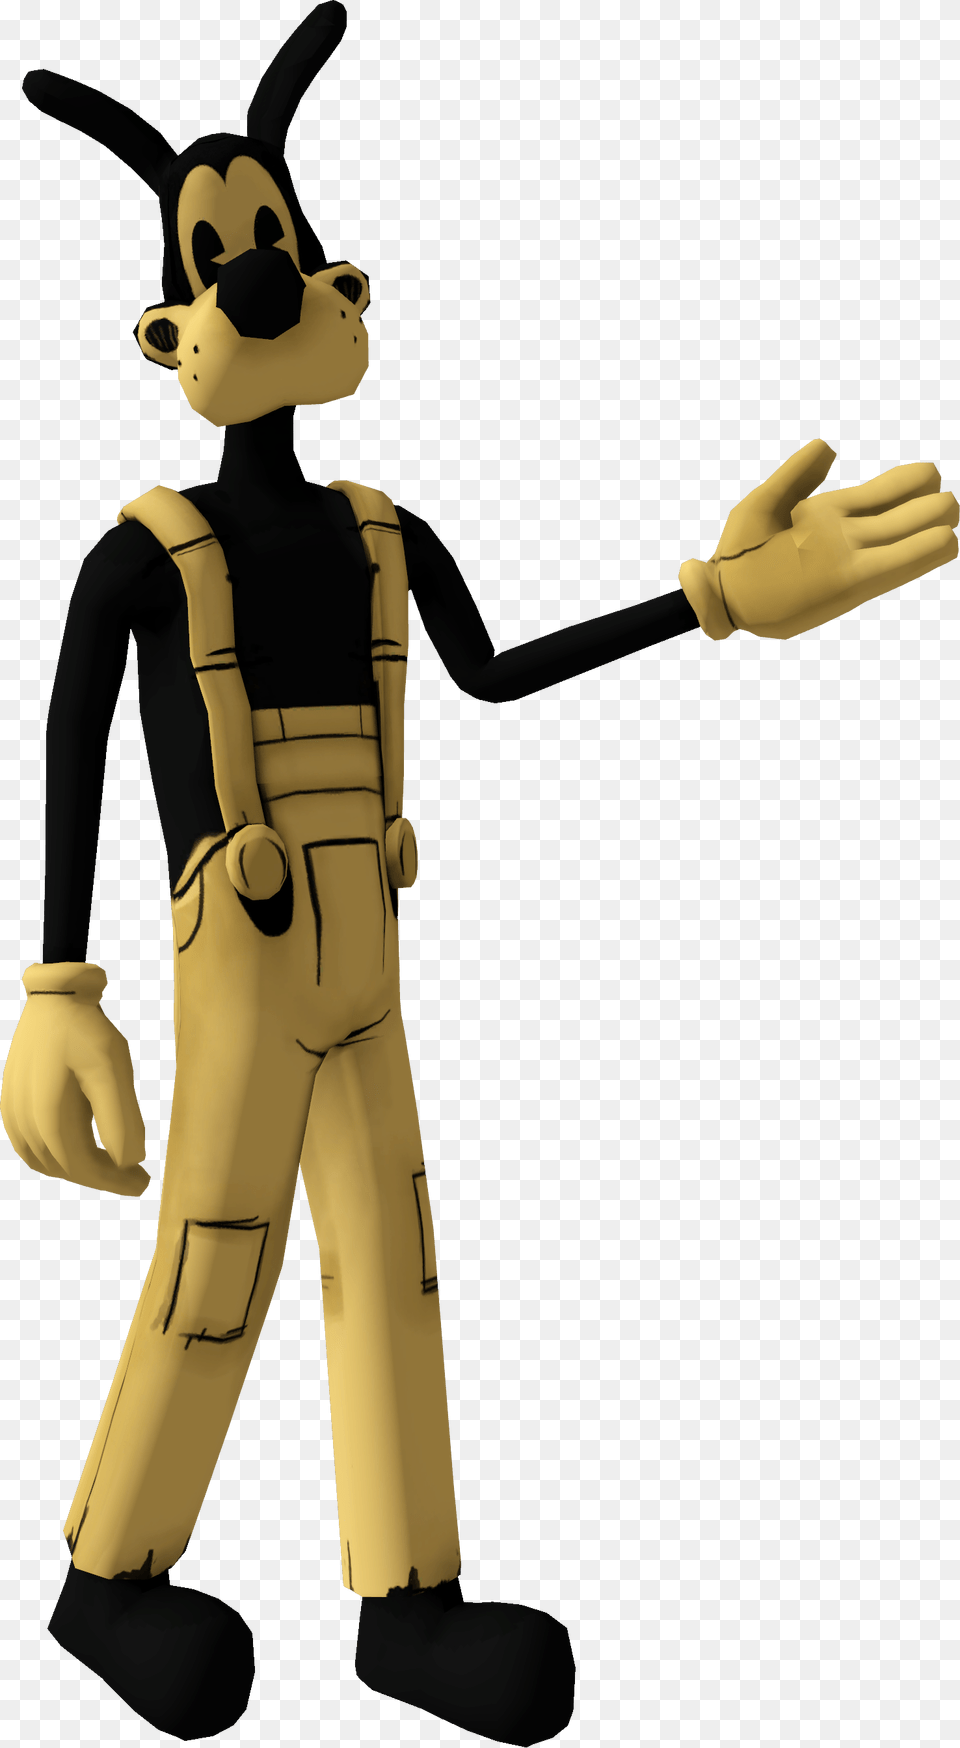 Clothing, Glove Png Image